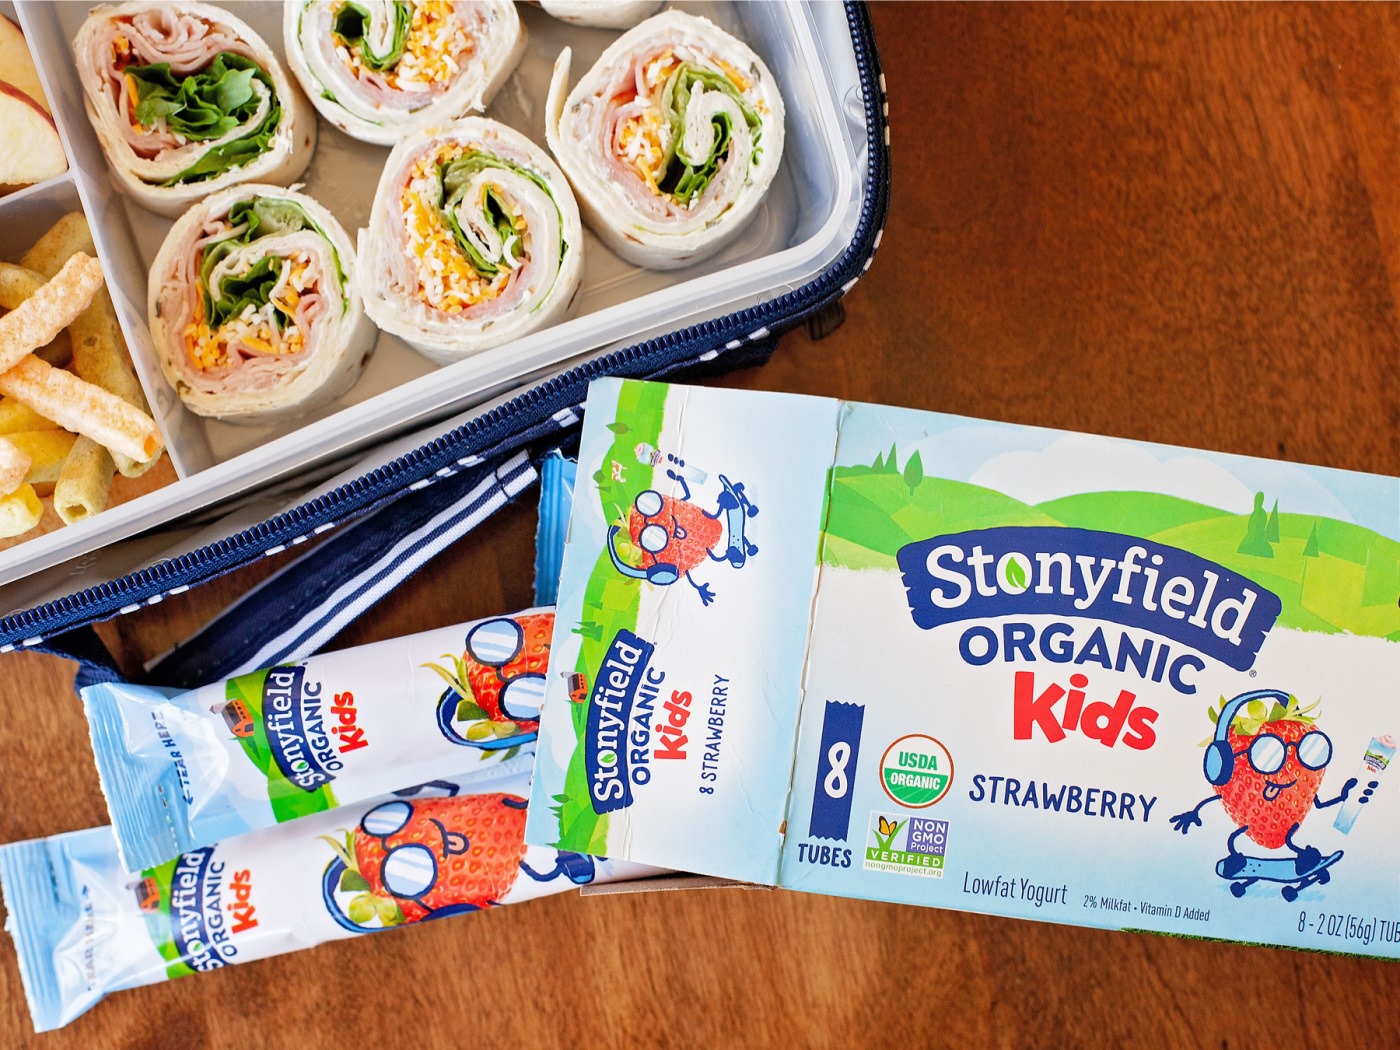 Stonyfield Organic Yogurt Products Are As Low As $2.29 At Kroger